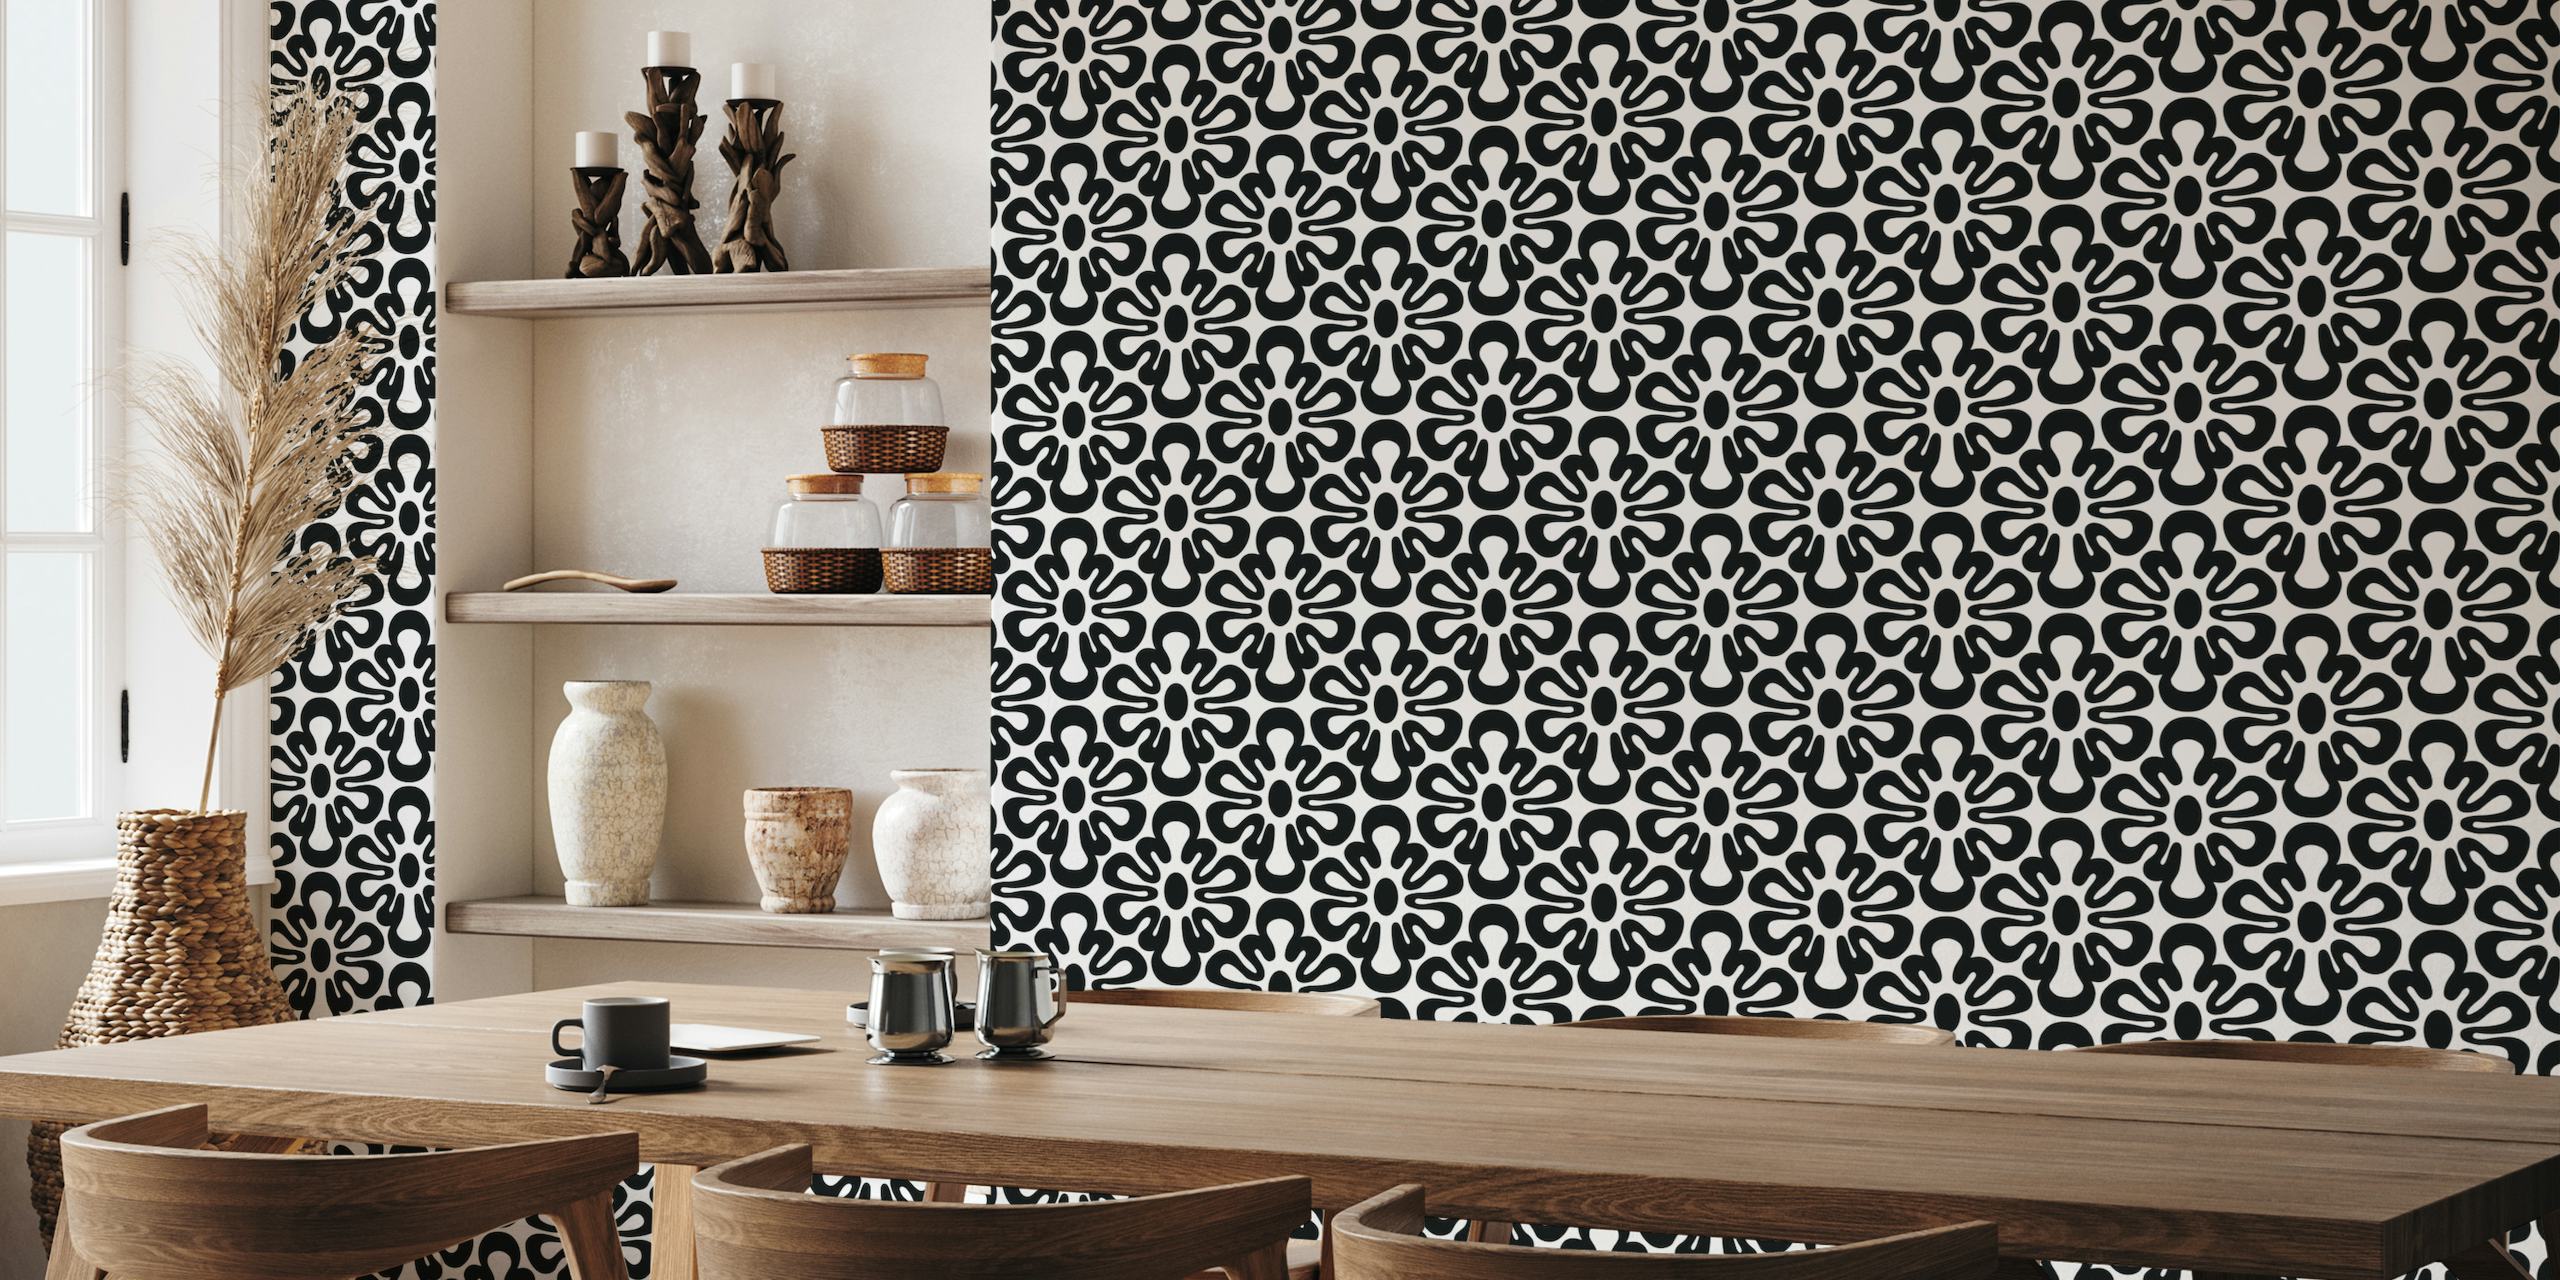 2625 D - abstract shapes pattern, black and white tapetit